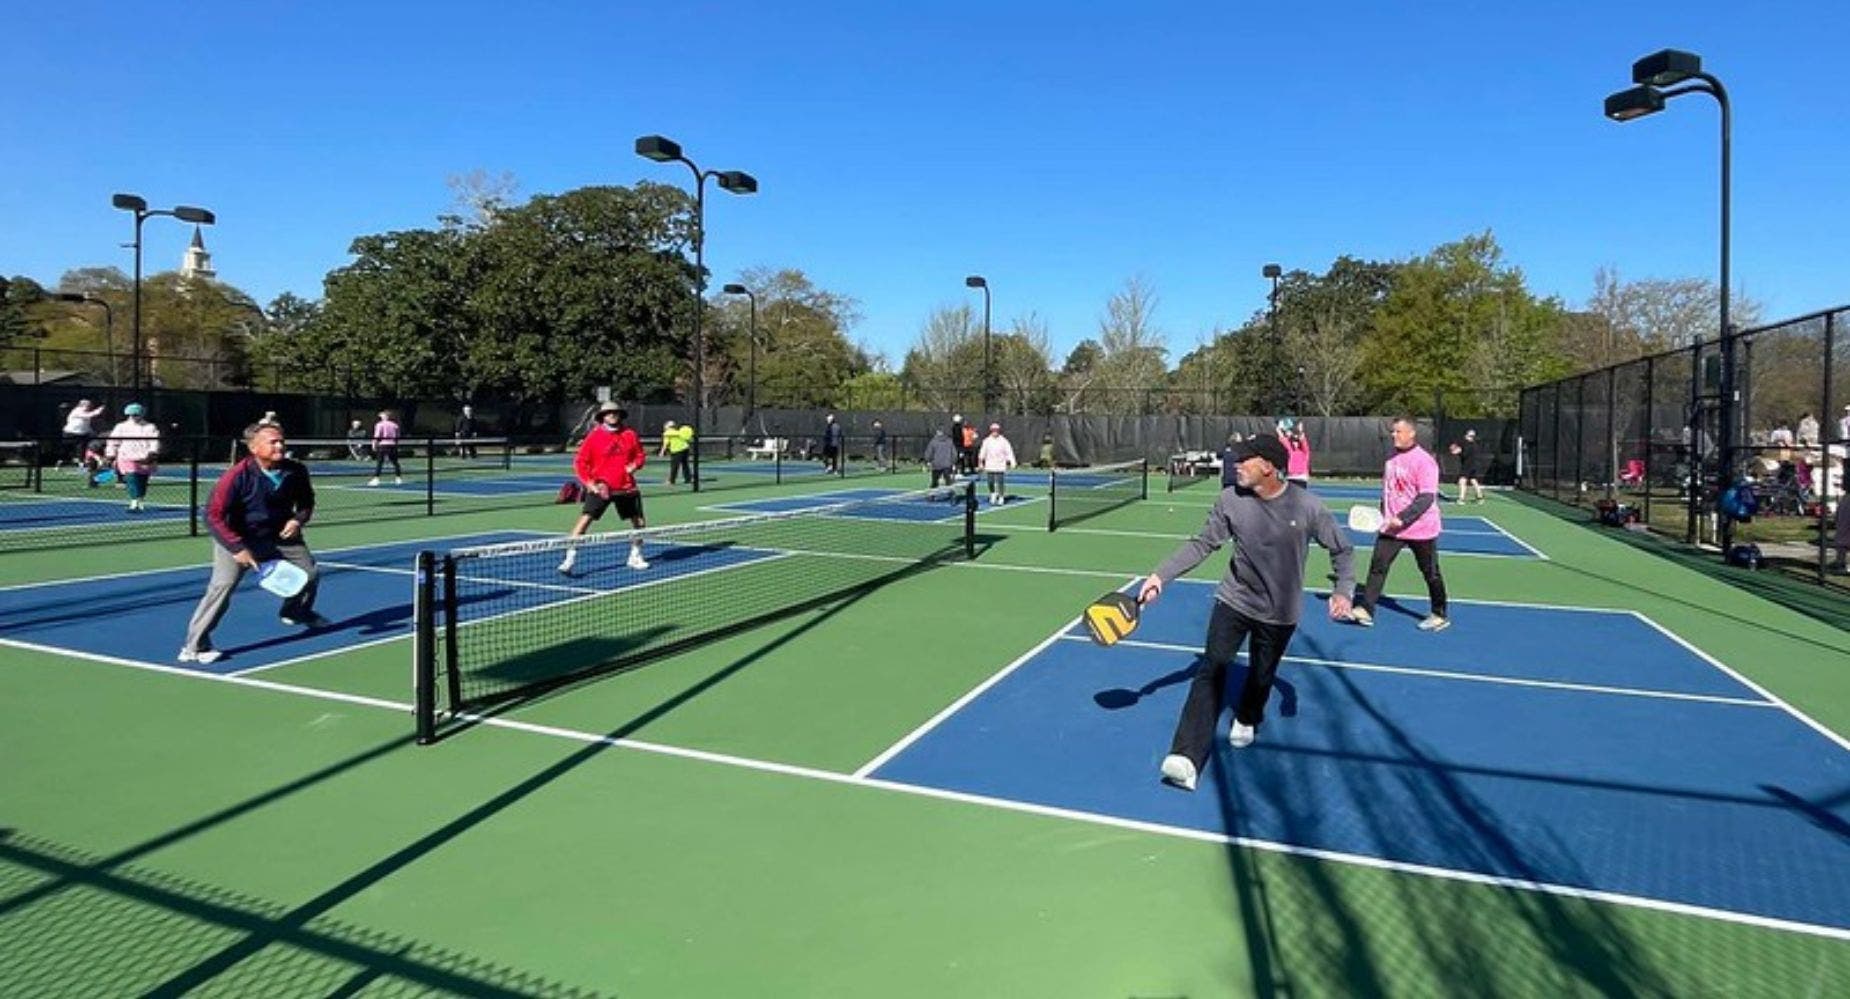 Bill Gates, Tom Brady, LeBron James And Gary Vee: Inside The Explosion Of The Sport Of Pickleball